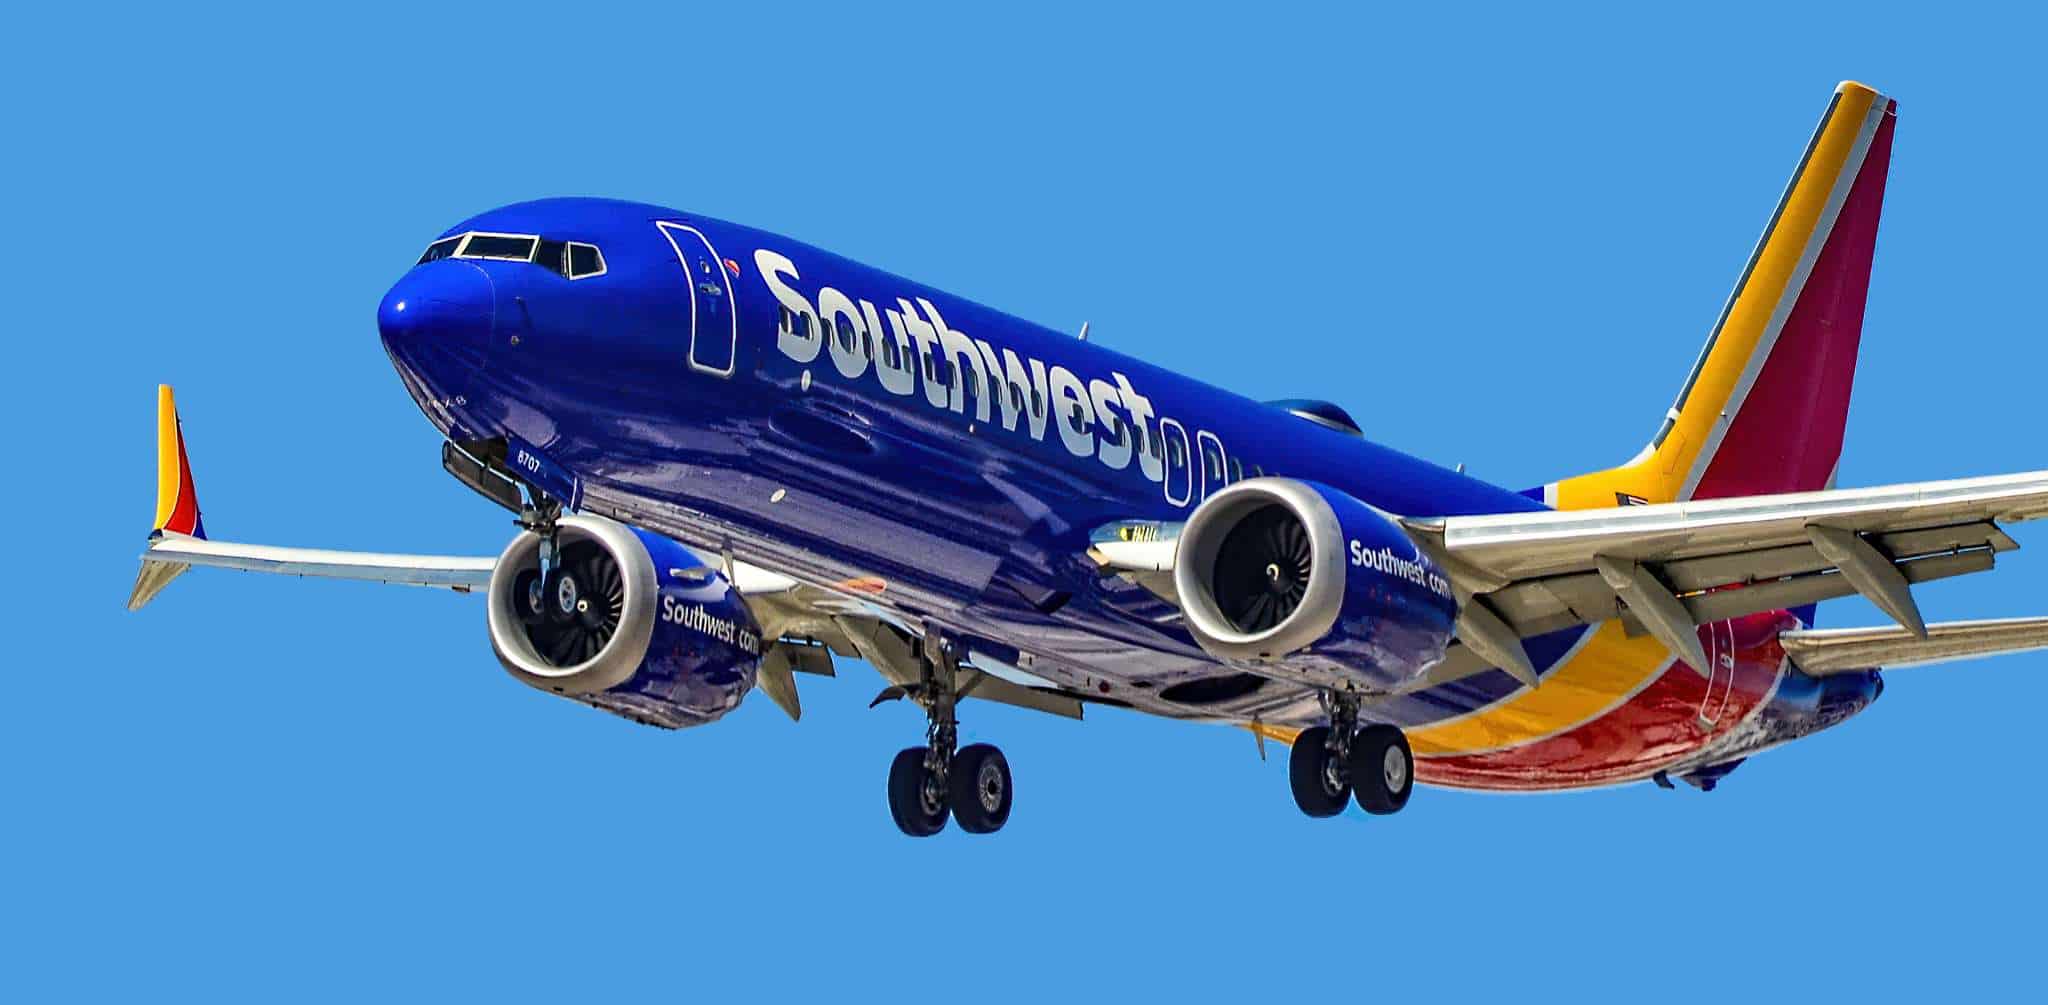 Southwest Flight Rejects Takeoff at Orlando Due Runway Incursion